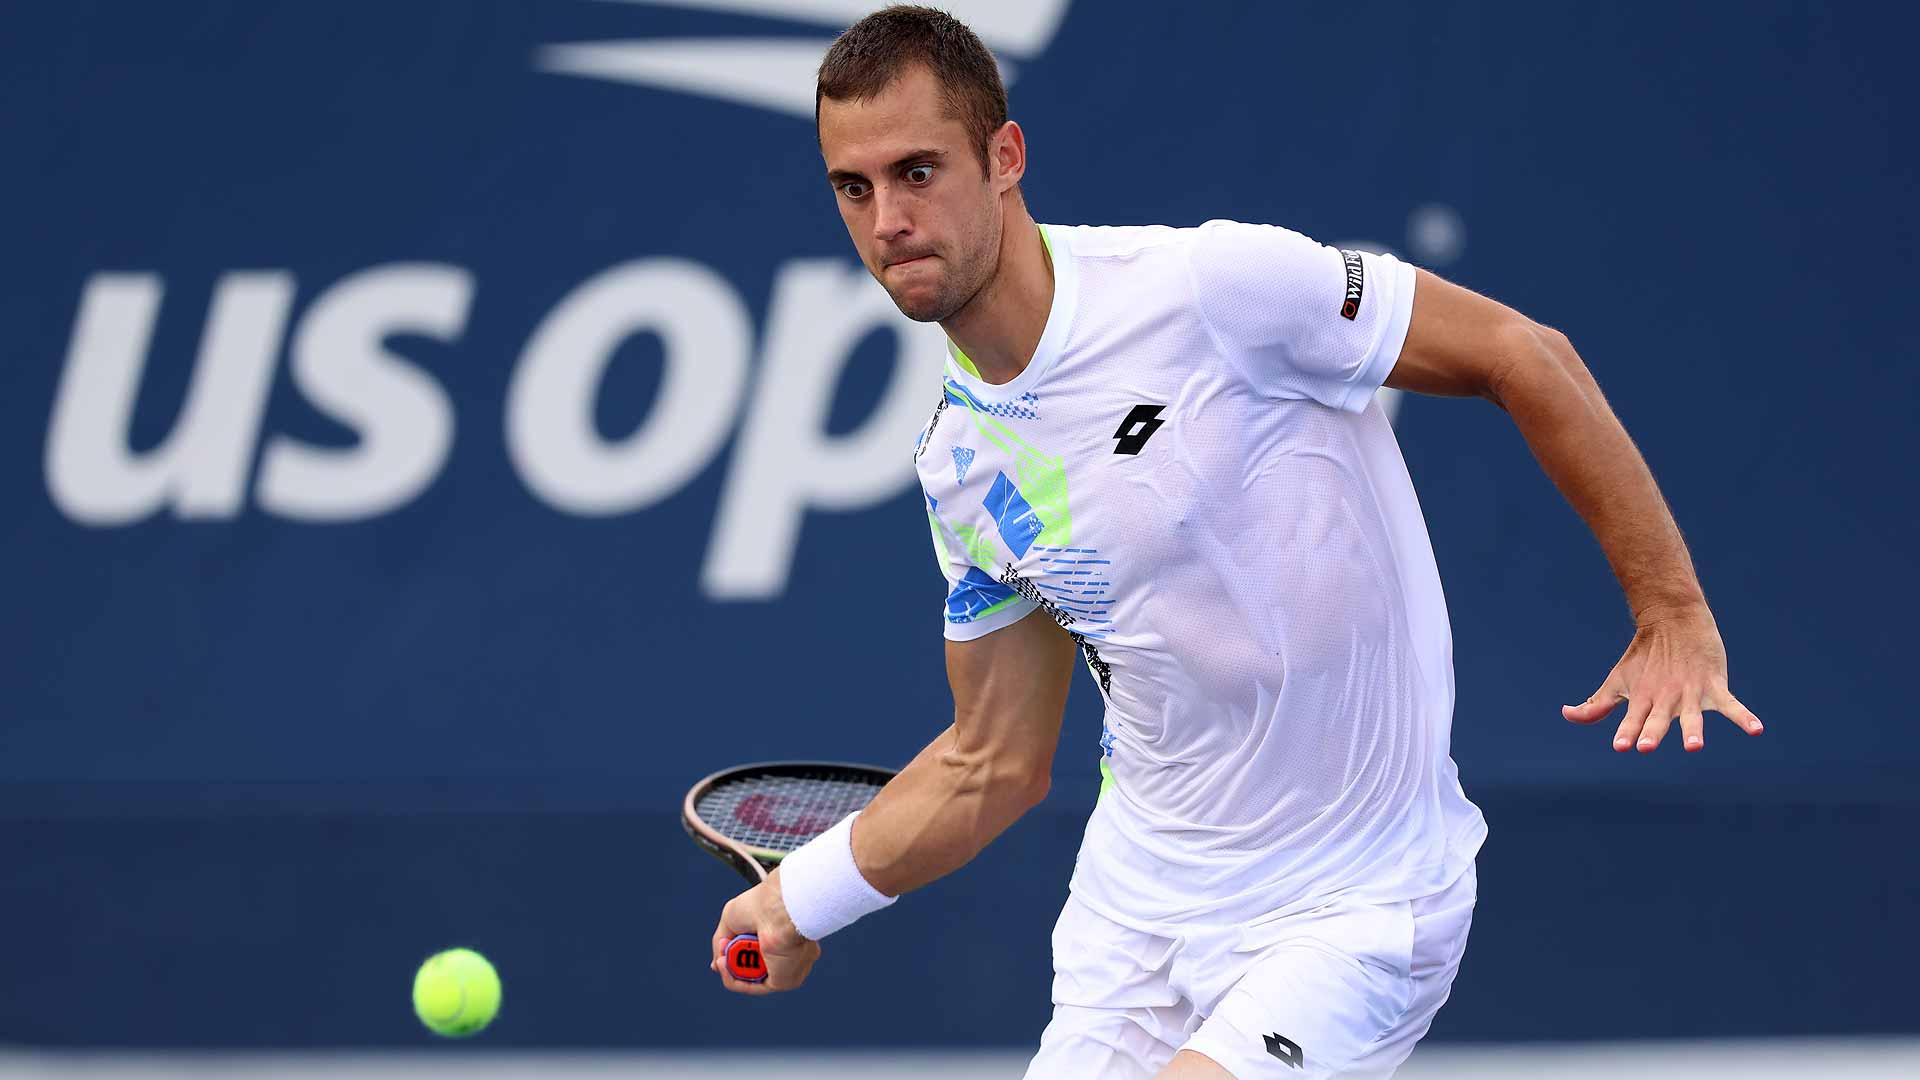 Laslo Djere is into the third round of the US Open without losing a set.